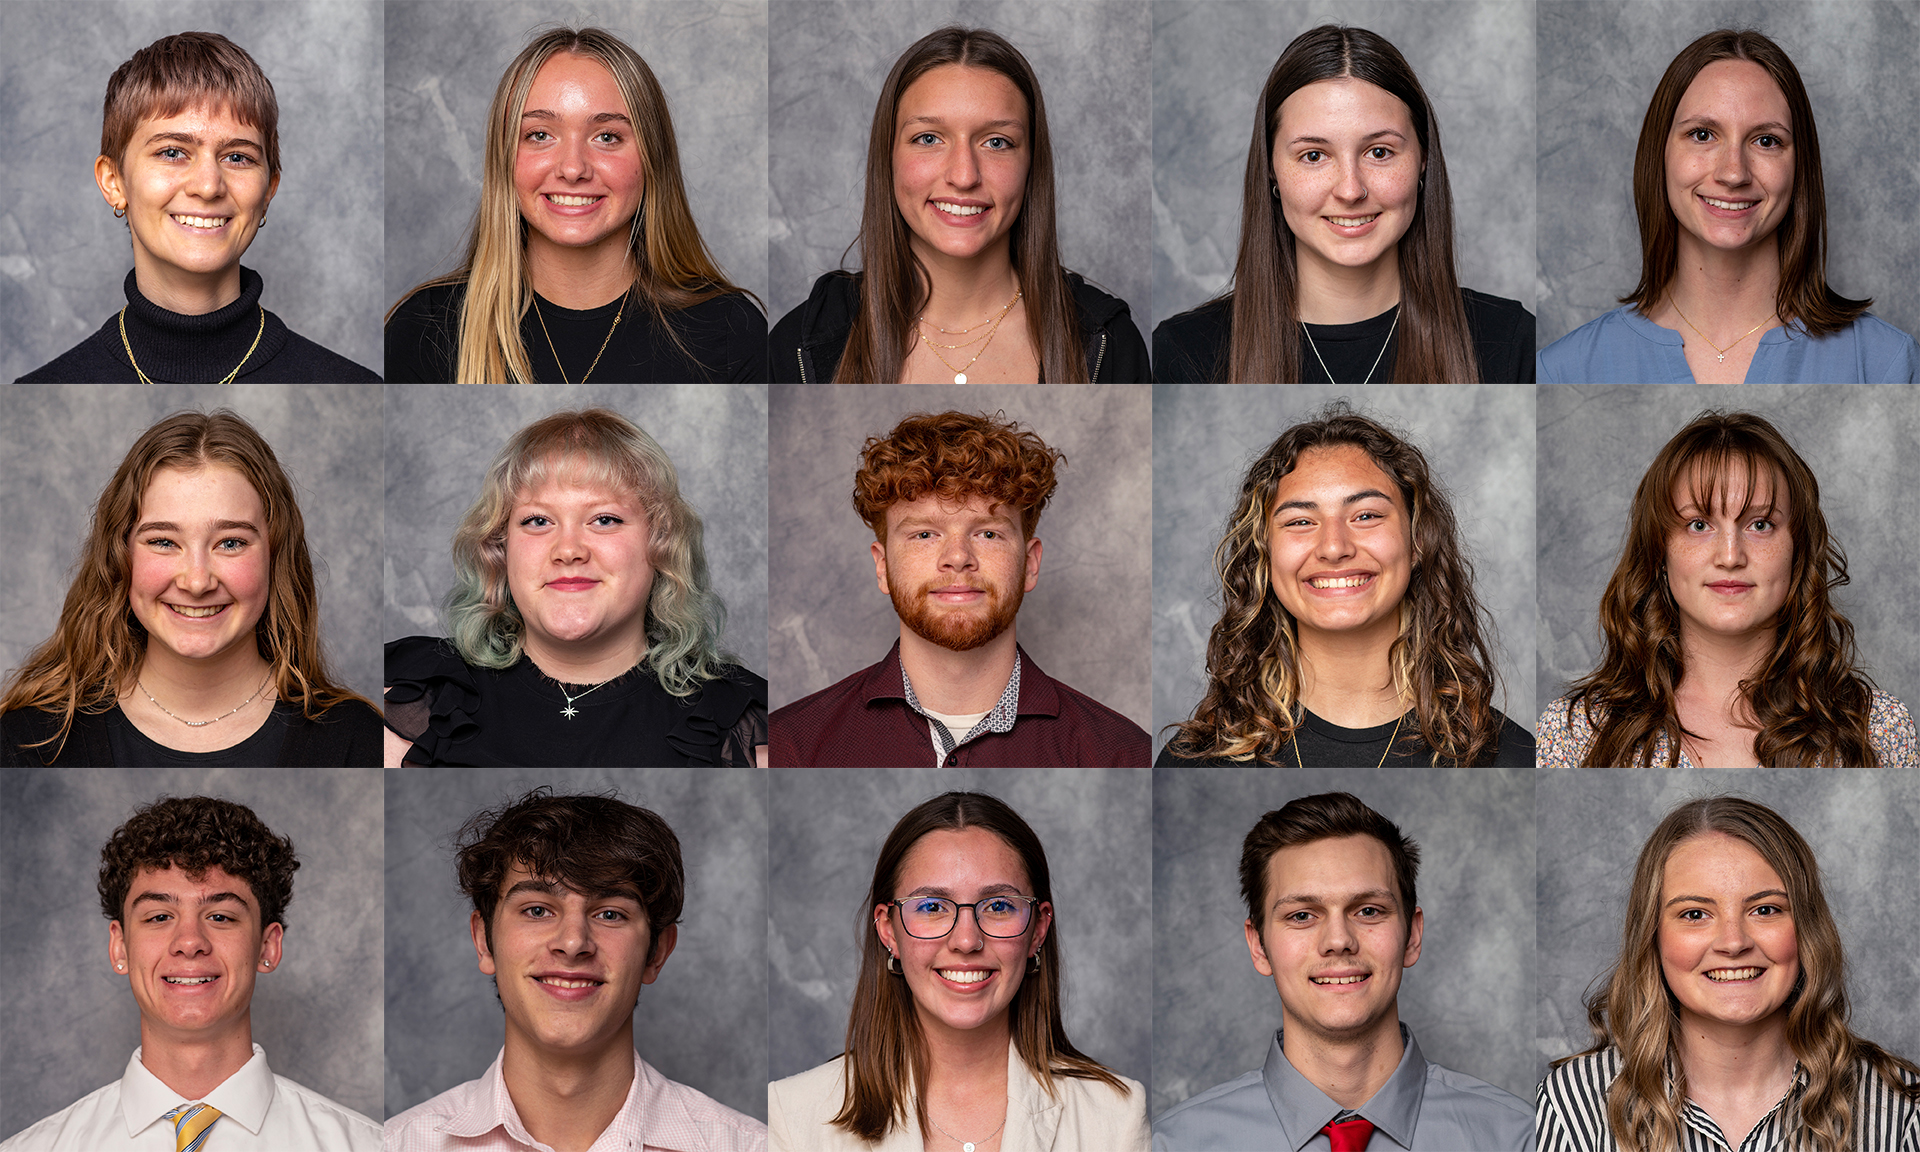 A collage of headshot photos of the 15 Gold Key Scholars.